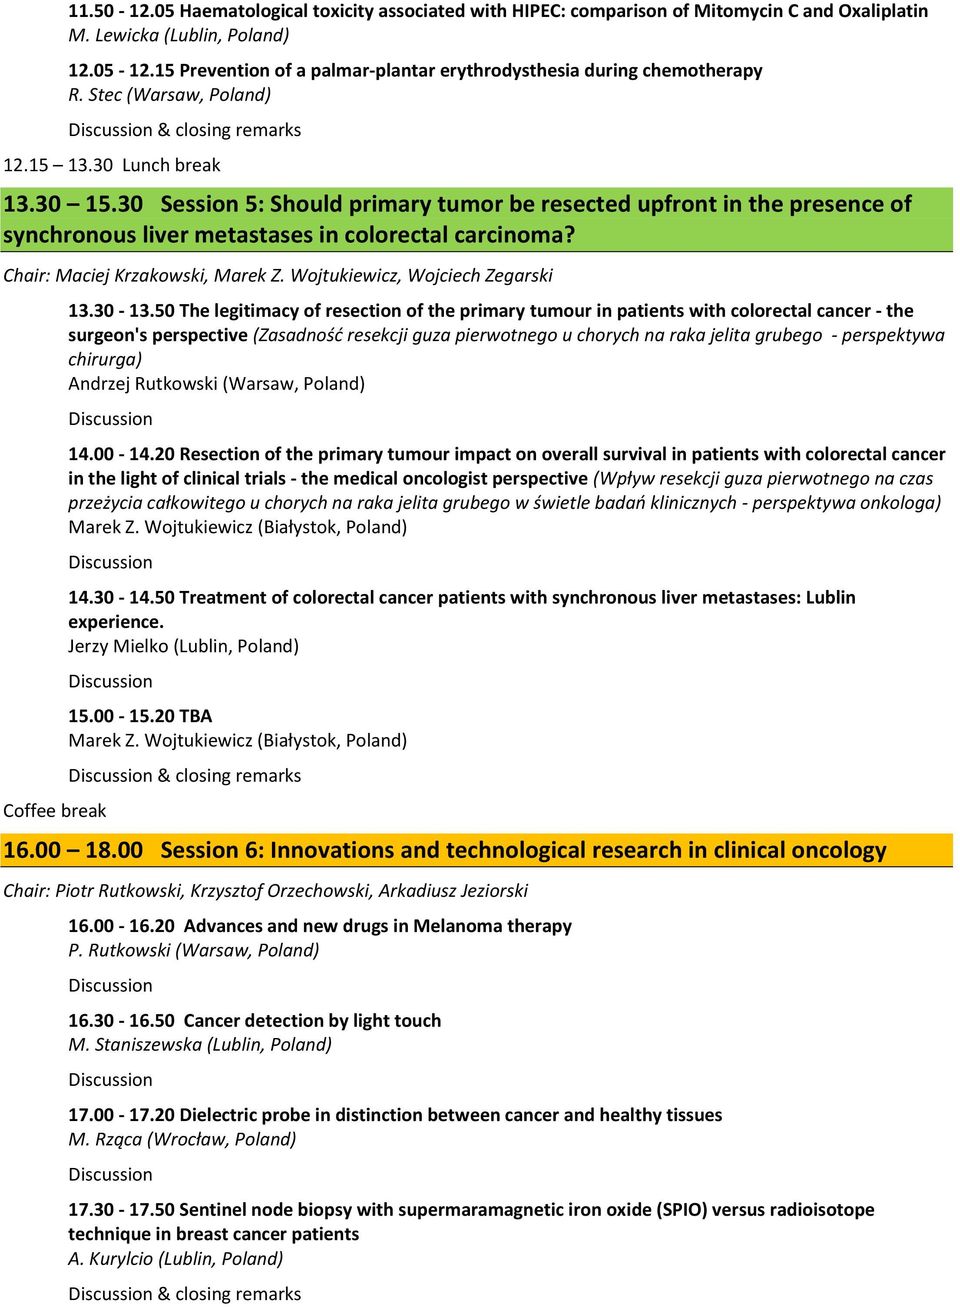 30 Session 5: Should primary tumor be resected upfront in the presence of synchronous liver metastases in colorectal carcinoma? Chair: Maciej Krzakowski, Marek Z.